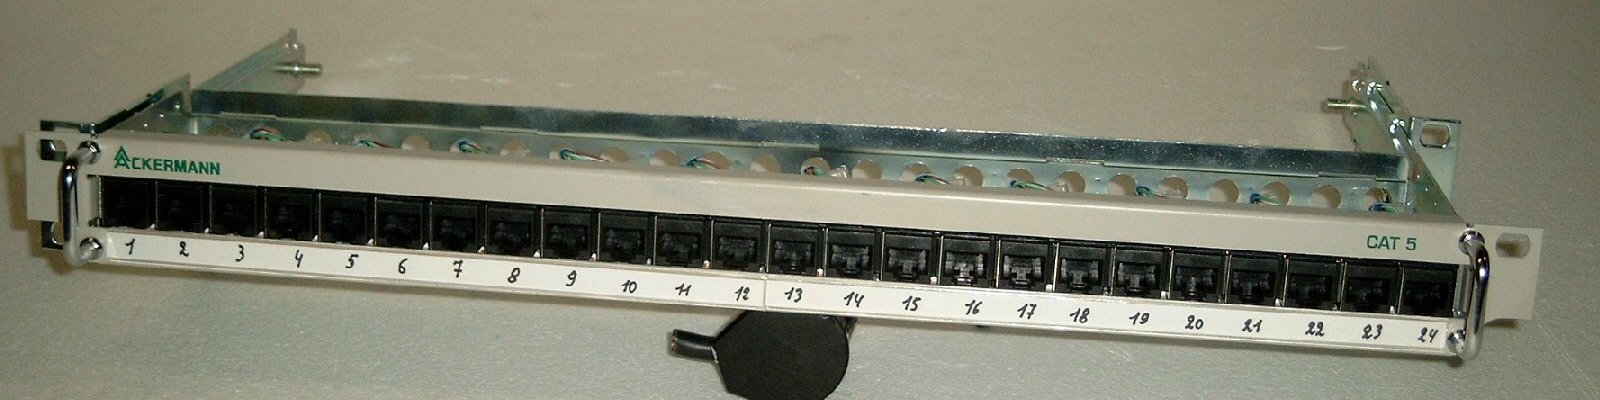 patchpanel.jpg